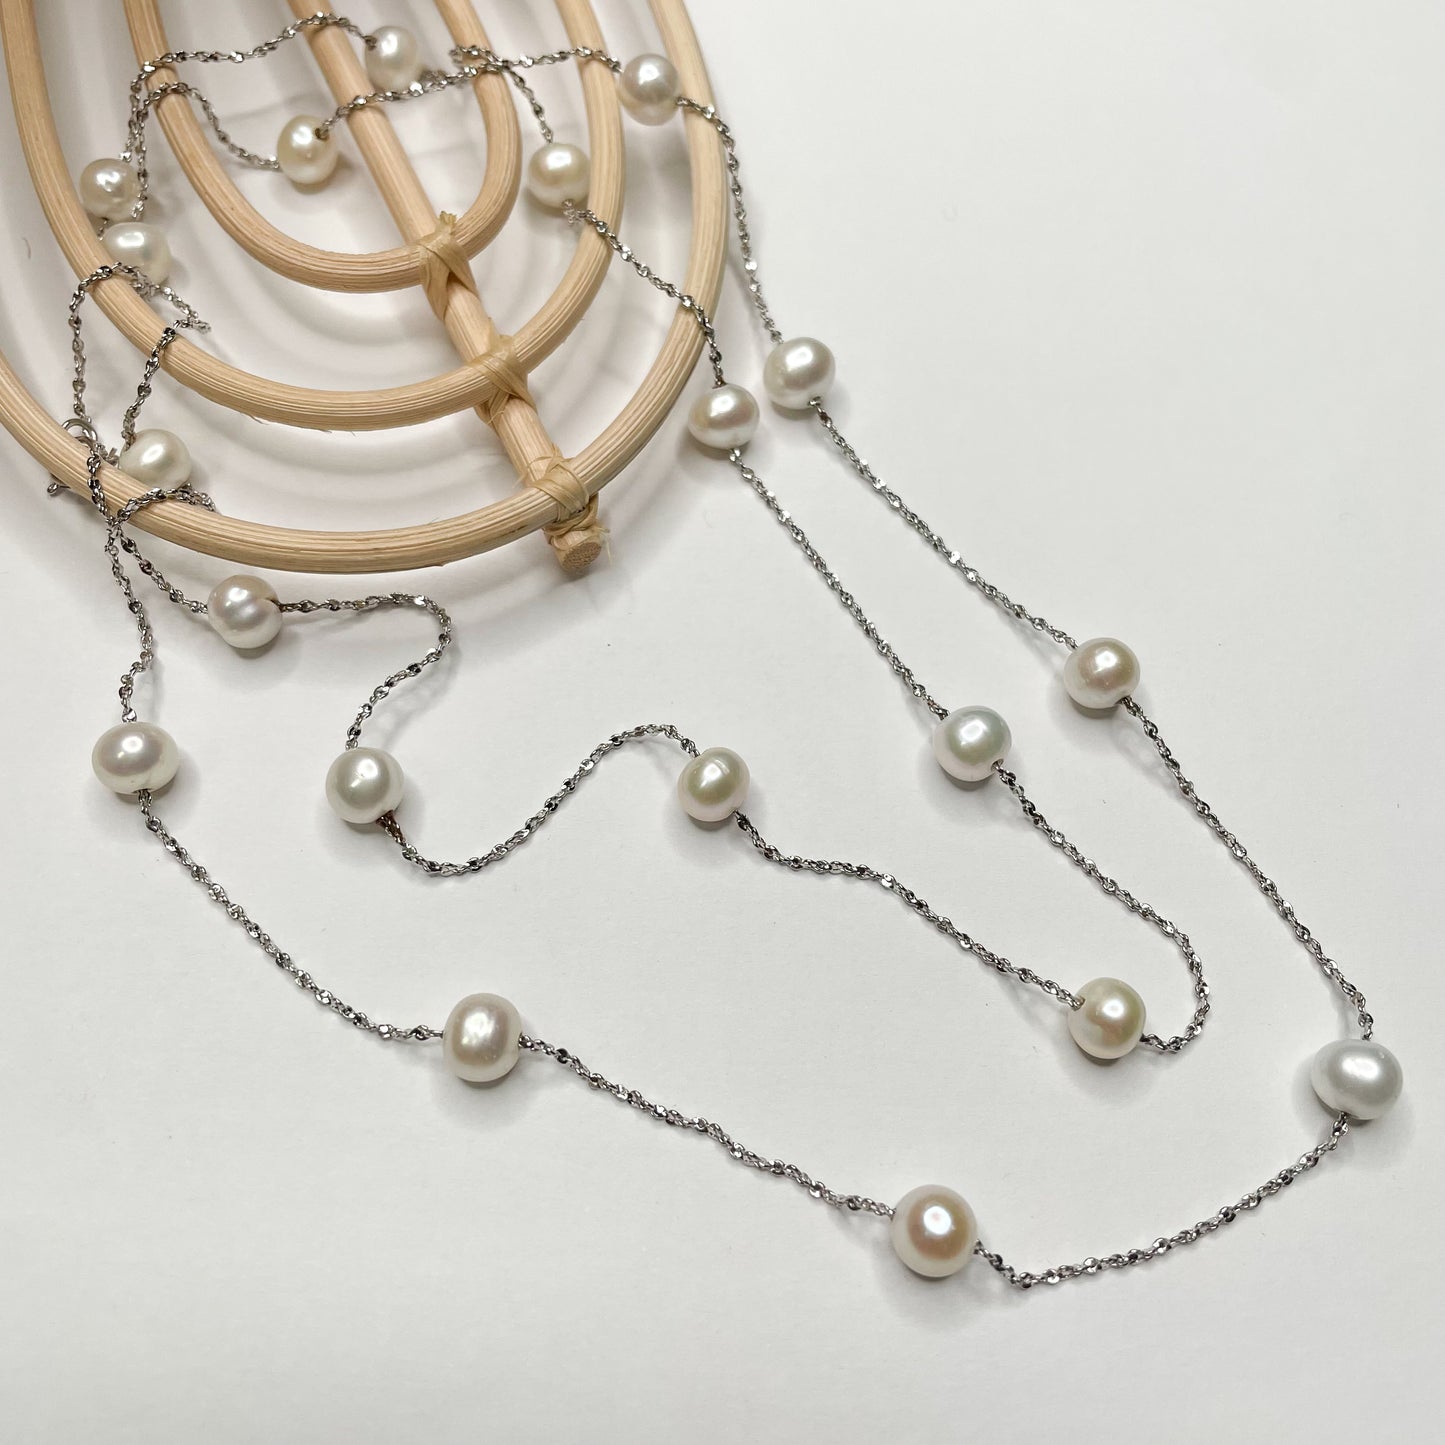 White Freshwater 36in Necklace - Solid Sterling Siver